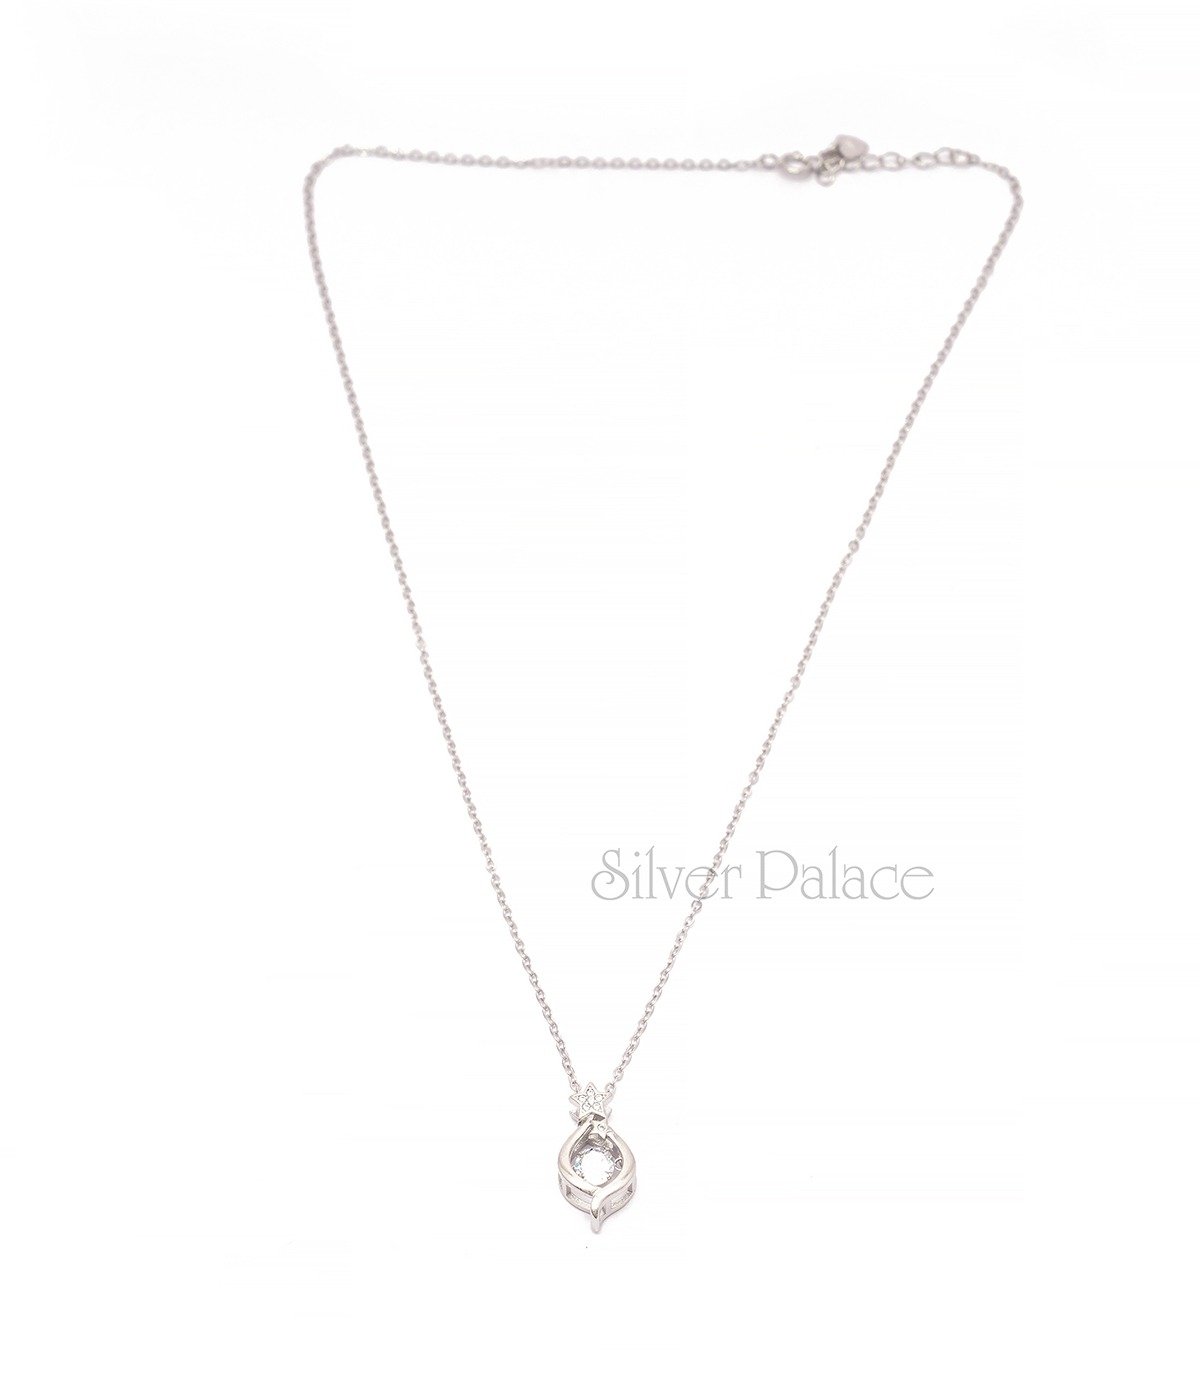 92.5 STERLING SILVER TINY STAR WITH LEAF PENDANT CHAIN FOR SCHOOL